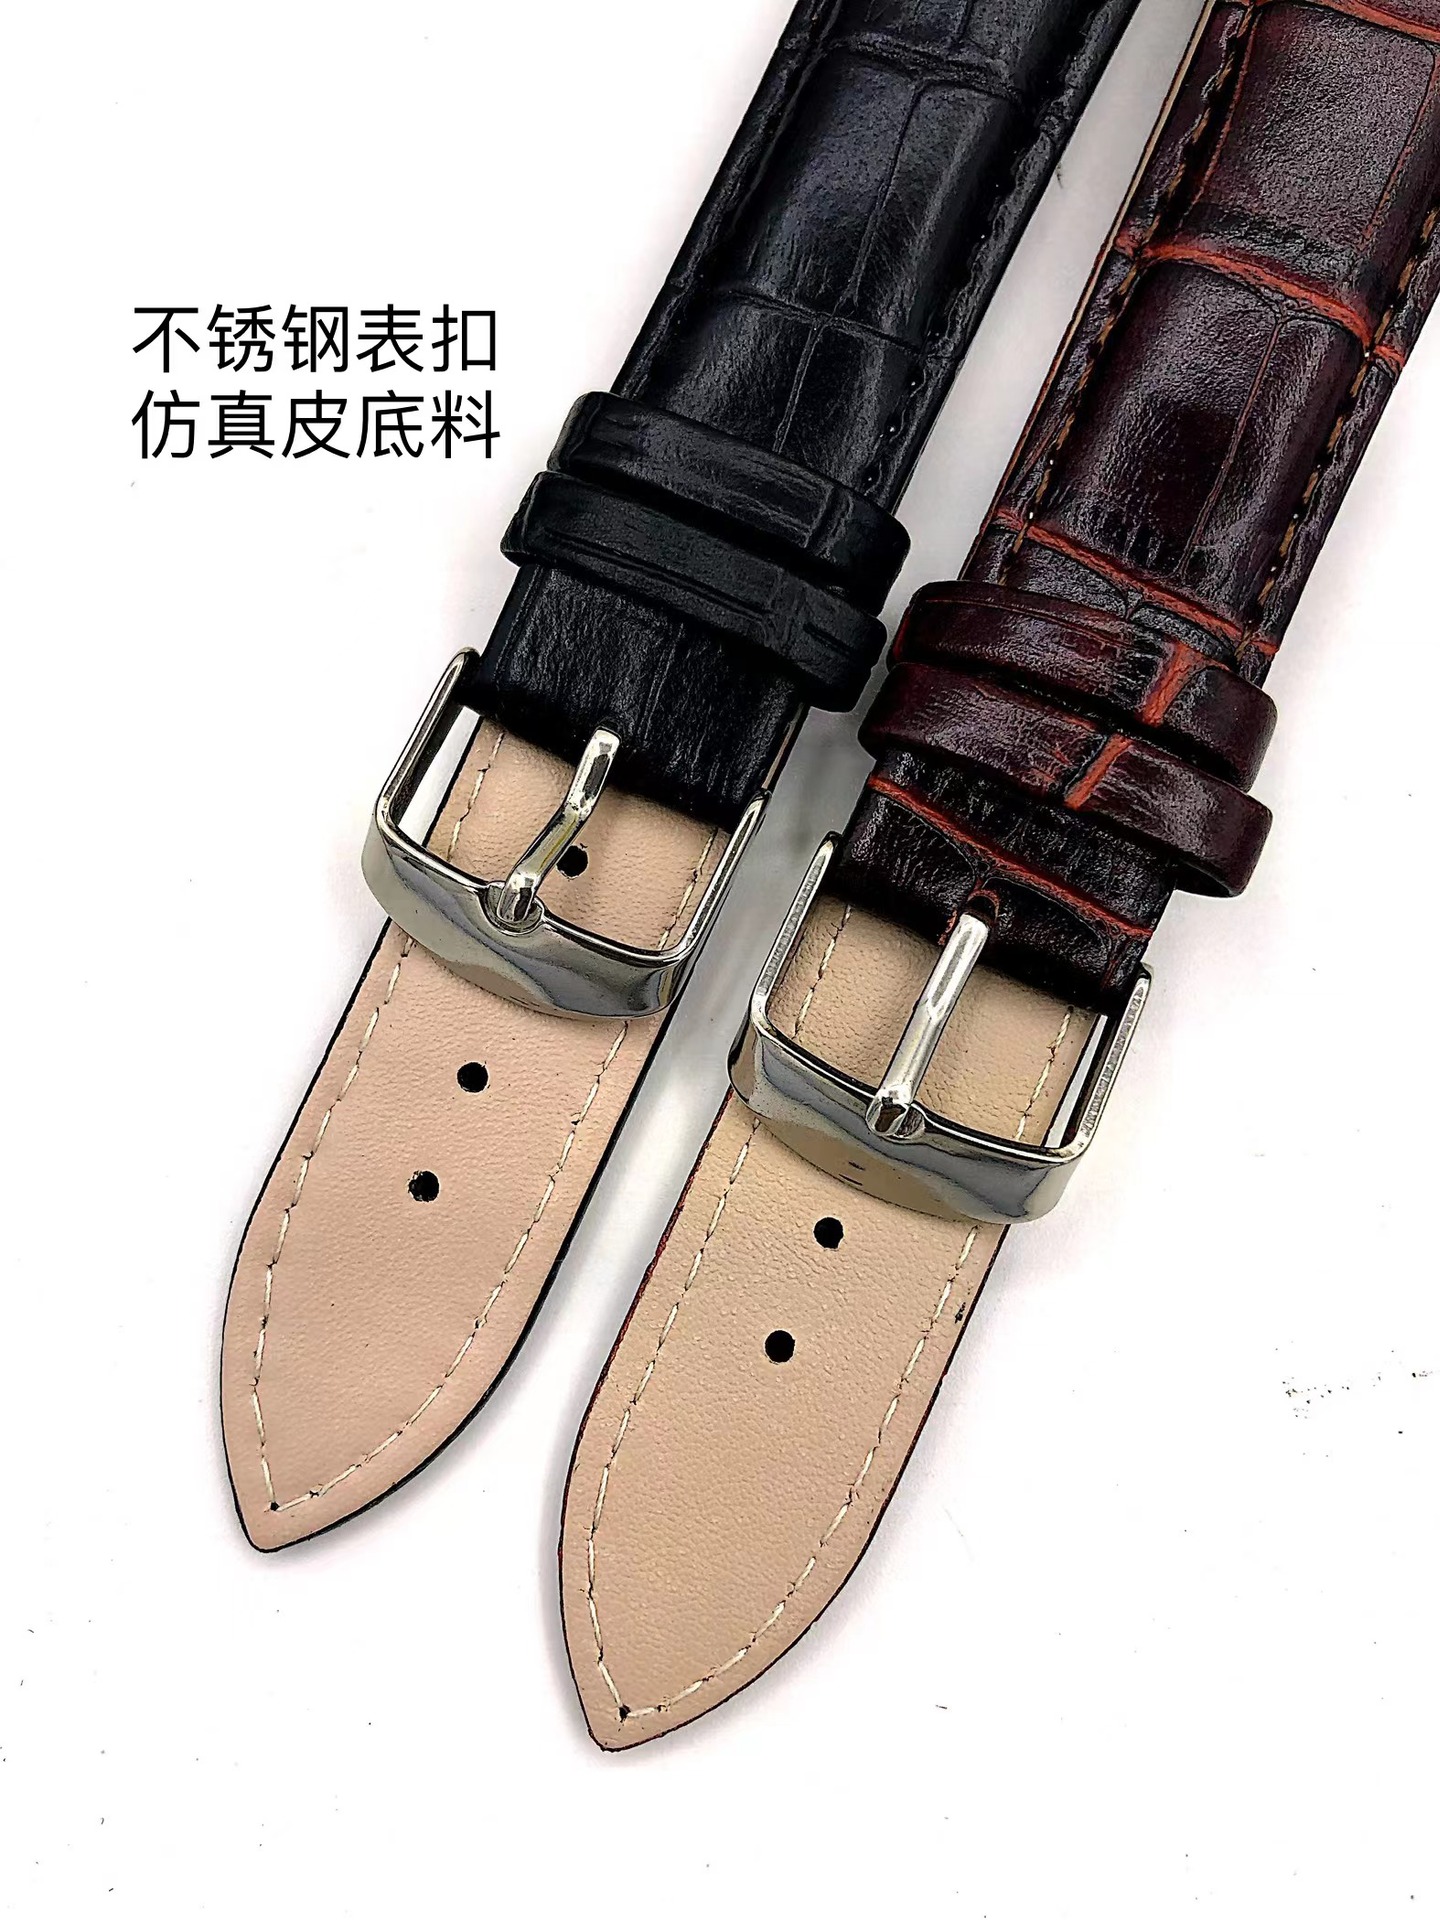 Wholesale Imitation Leather PU Bamboo Pattern Strap Crocodile Pattern Universal for Men and Women Watch Band Pin Buckle Accessories